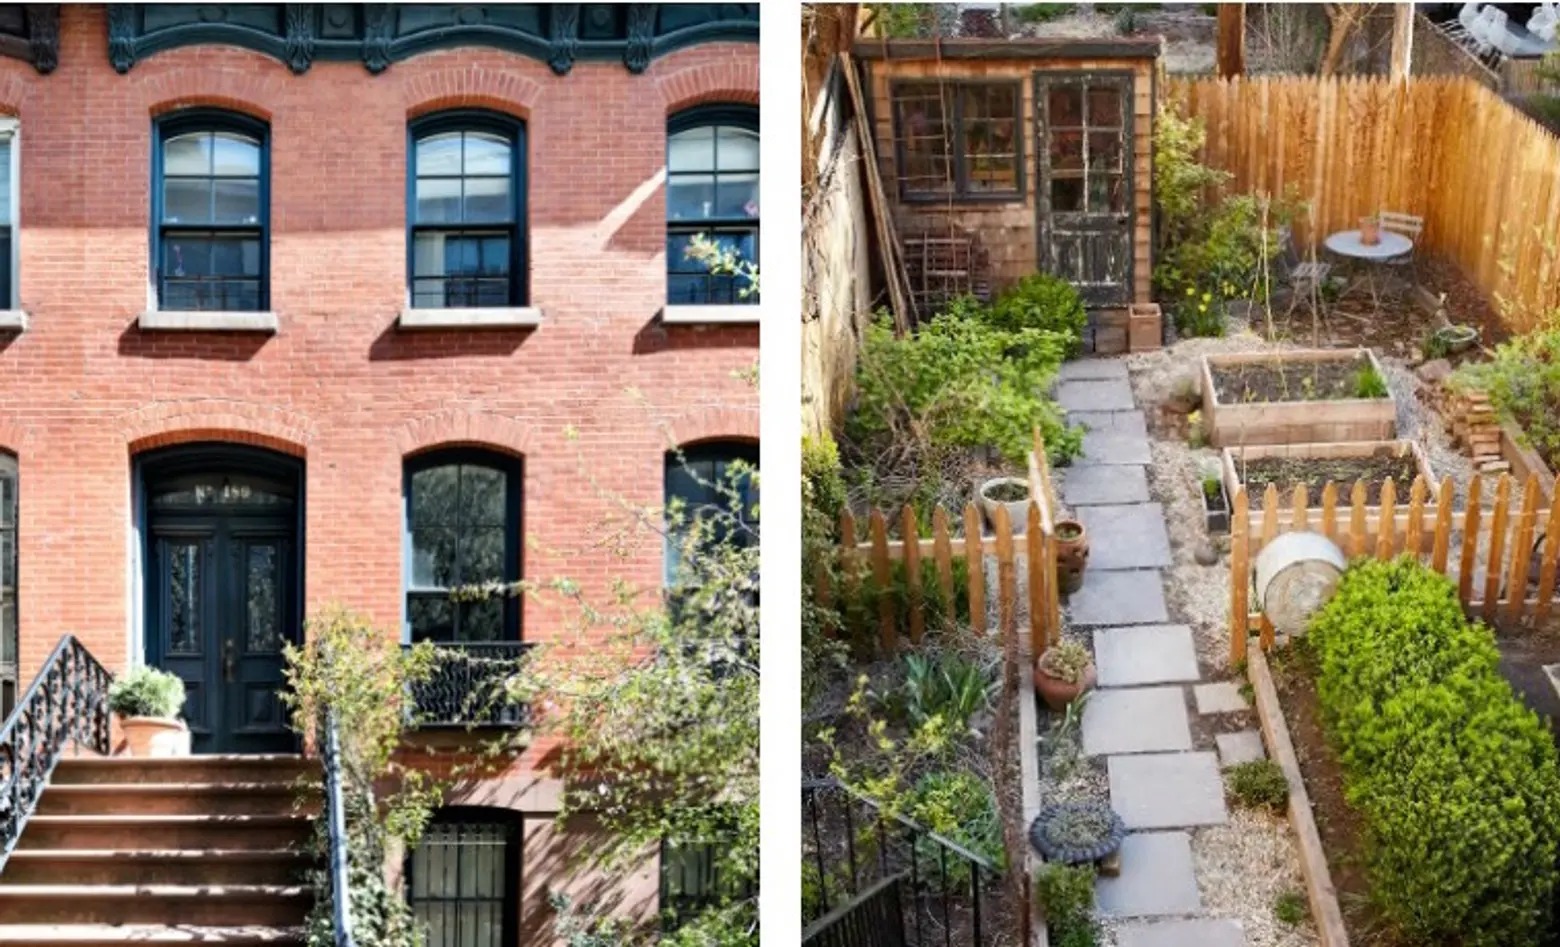 189 Huntington Street, Cool Listings, Cobble Hill, Townhouses, Brooklyn Townhouse for Sale, interiors